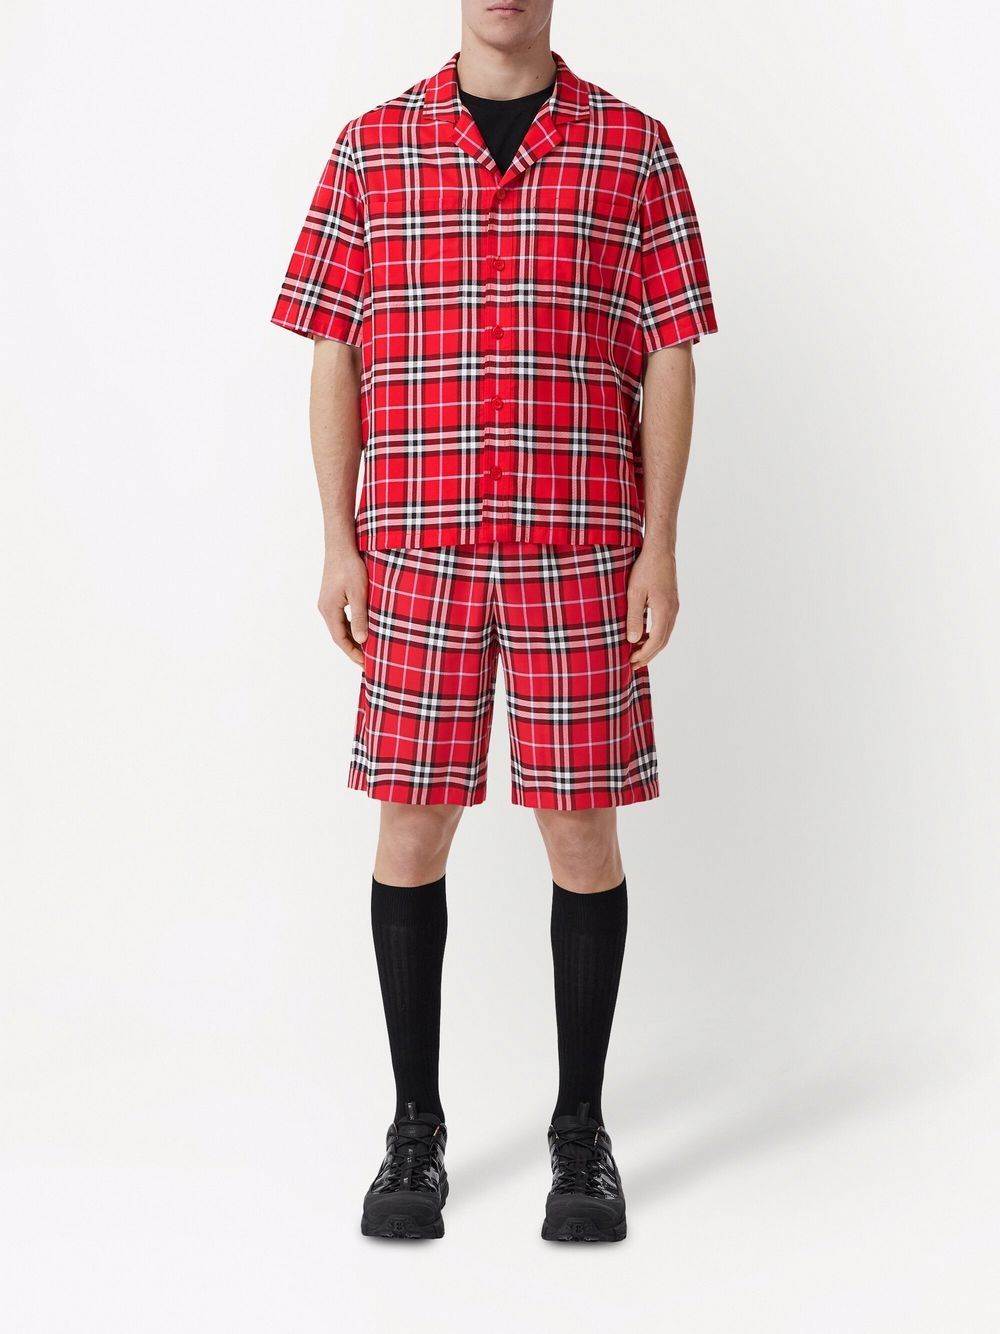 Red/black/white cotton short-sleeve checked shirt